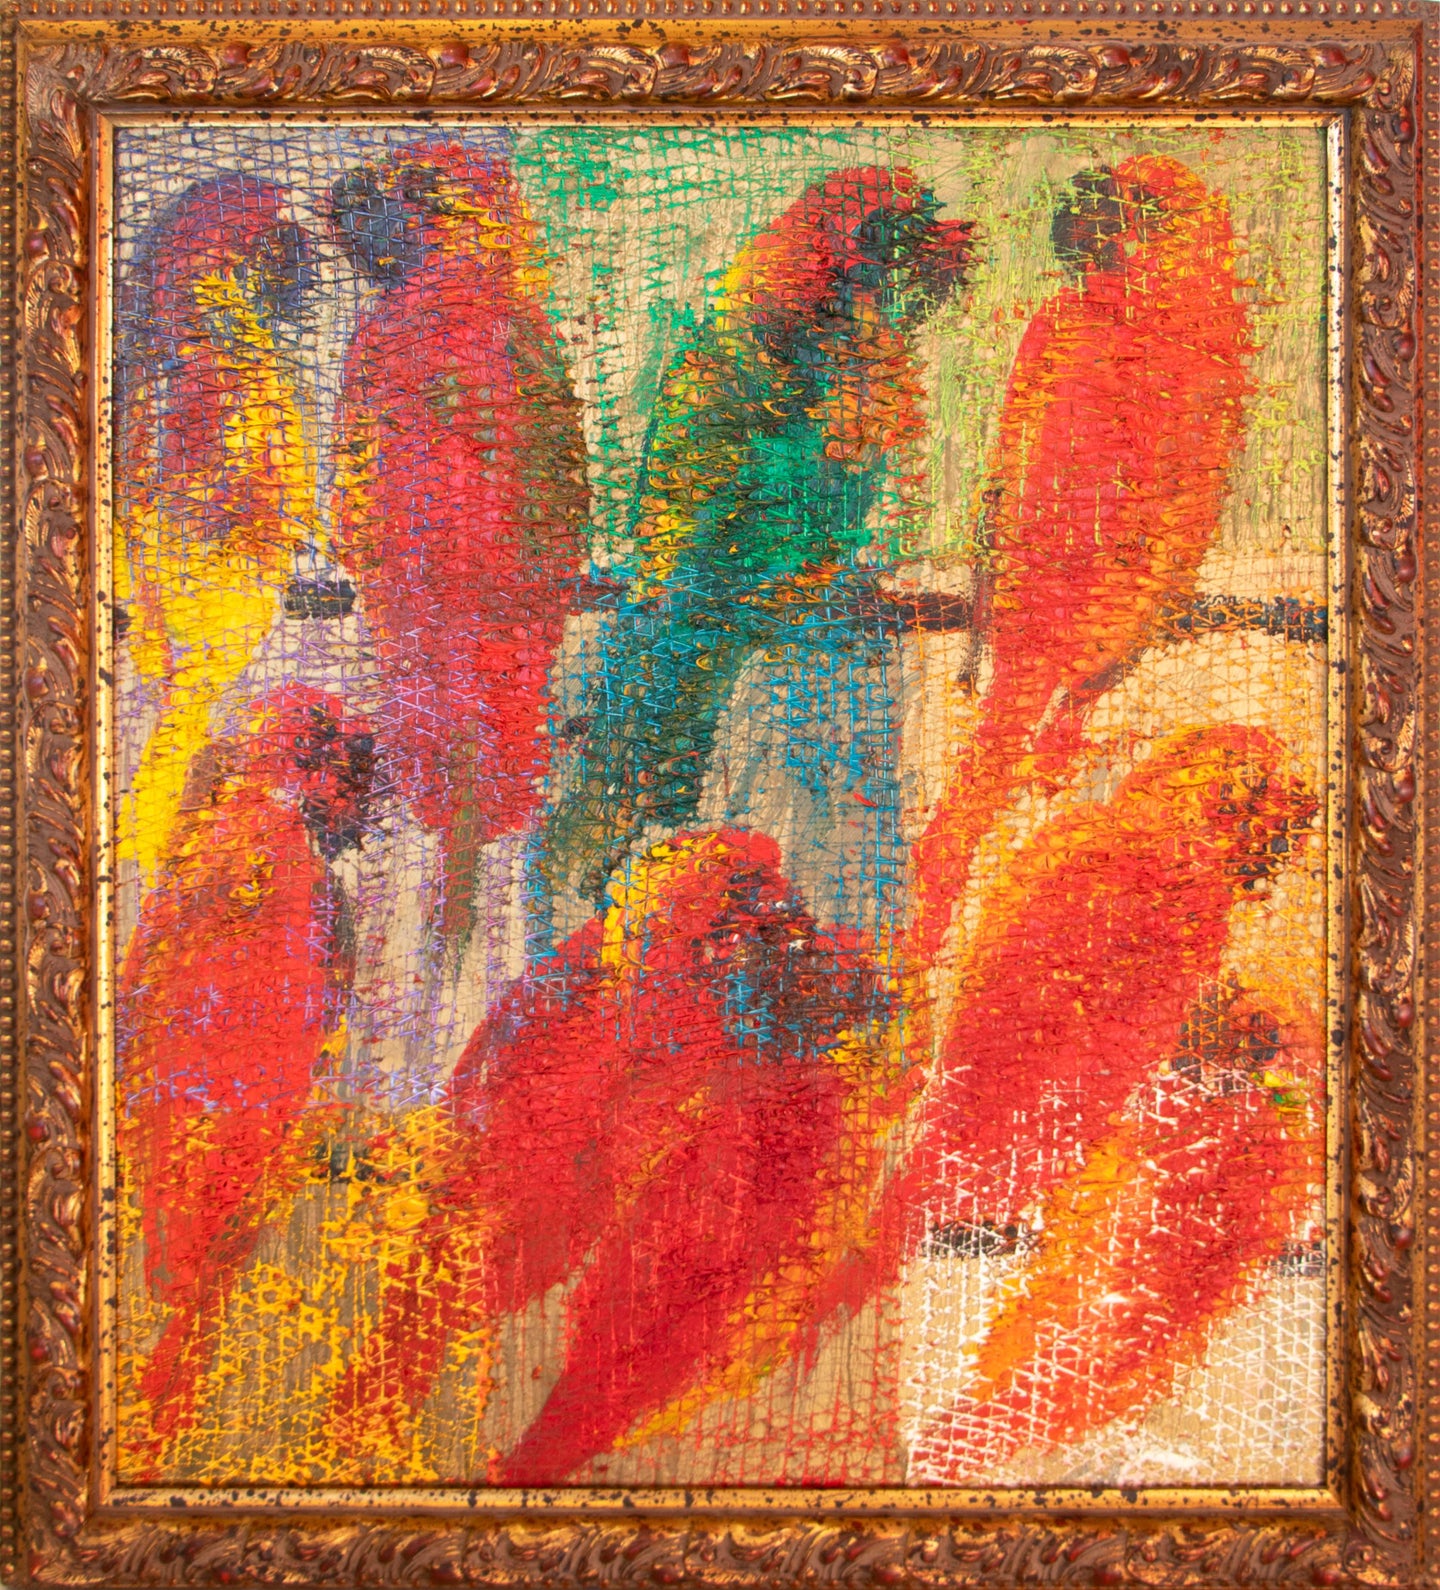 Hunt Slonem’s parrot oil painting “Lories Bayou,”  painted in 2008 in oil paint on wood board measuring 29.5 x 26 inches. Framed by Hunt Slonem in an antique gold frame. Framed wall art by Hunt Slonem for sale at Manolis Projects gallery.